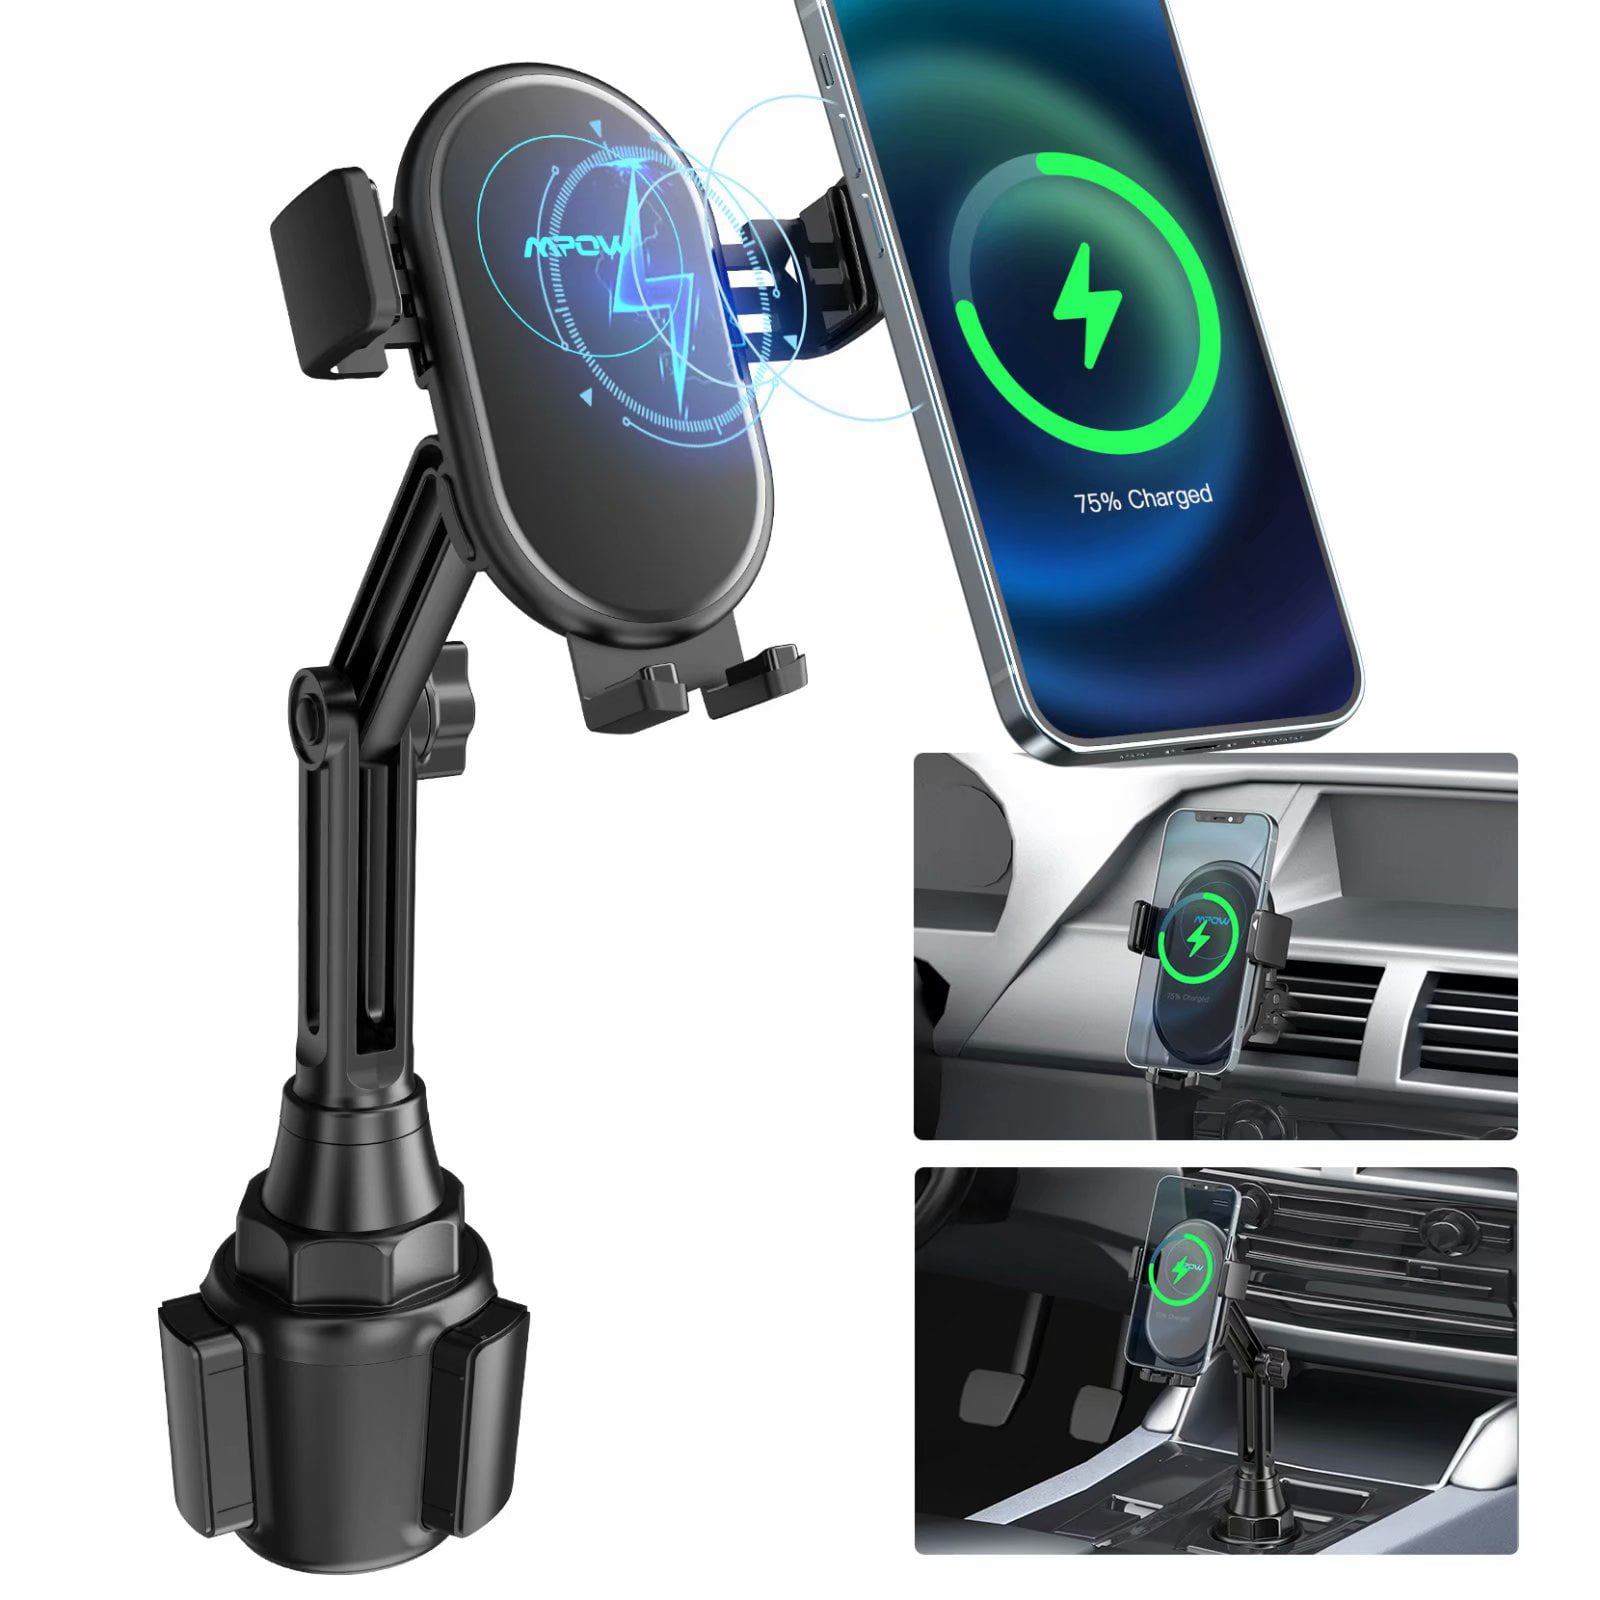 Clamping Air Vent Suction Cup Windshield Cell Phone Holder Compatible with All Apple iPhone Android Smartphone KMSCO Wireless Car Charger Mount 15W Qi Fast Charging Auto